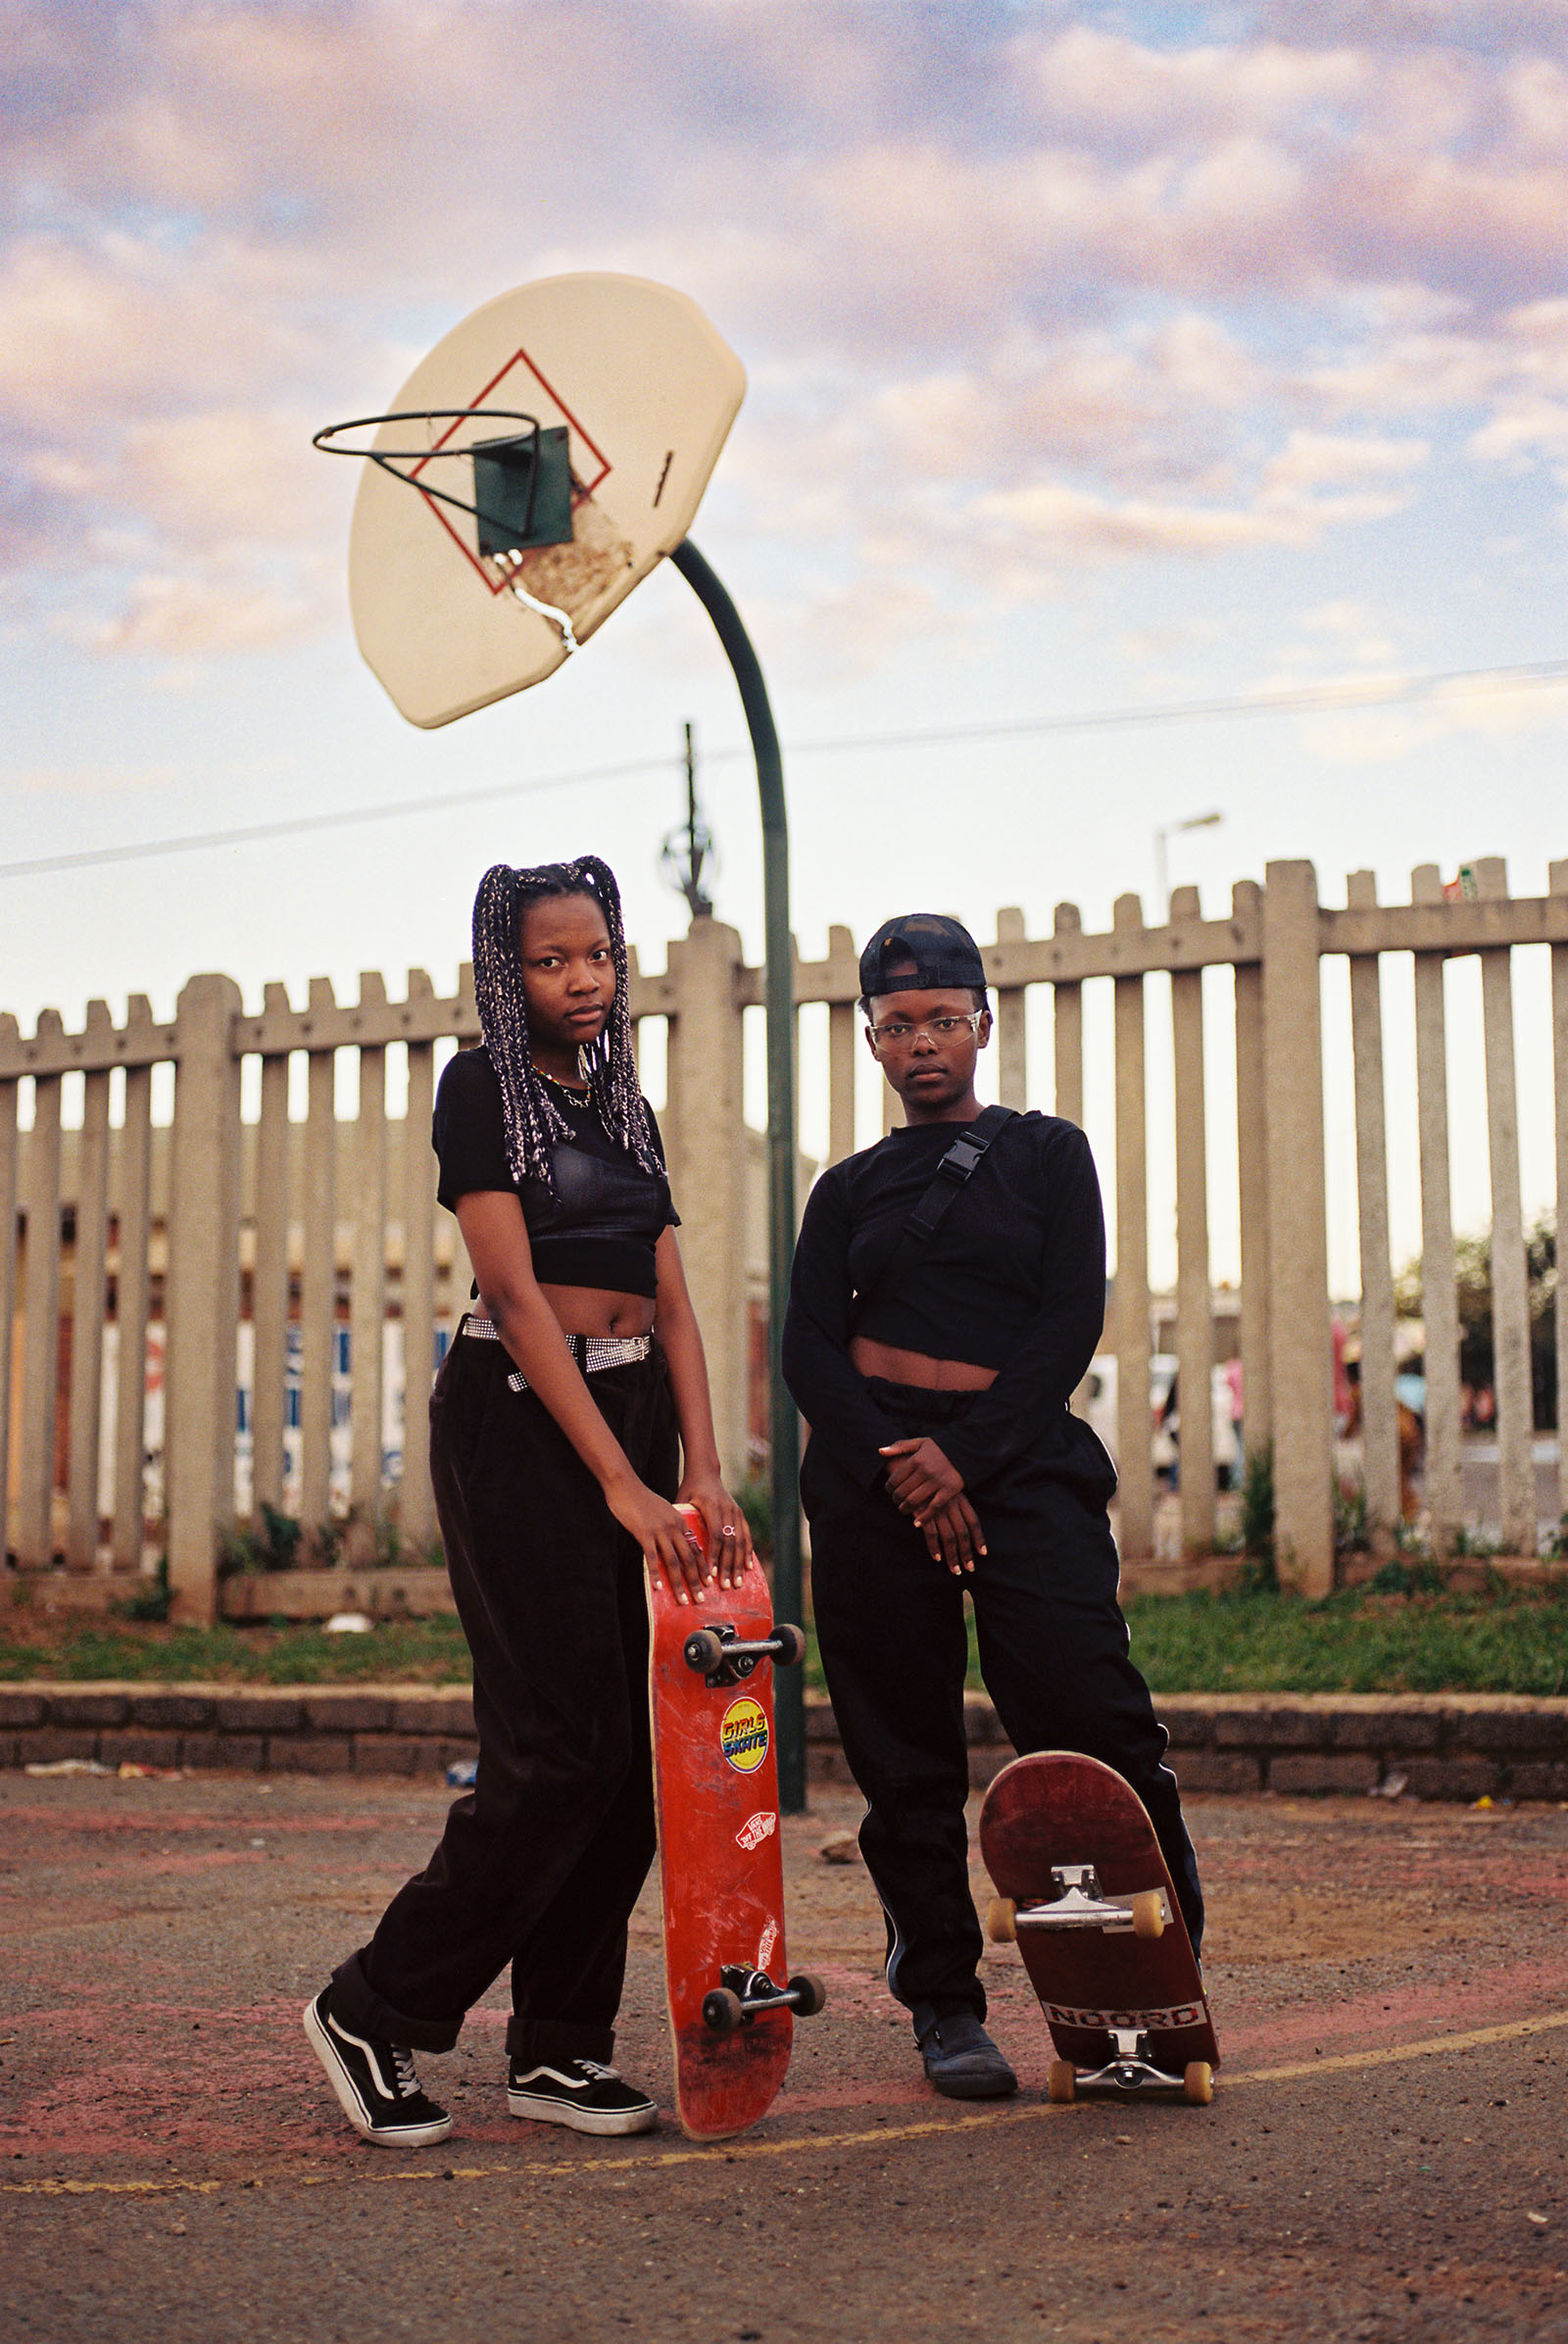 Two girls stand under a basketball hoop with skateboards.